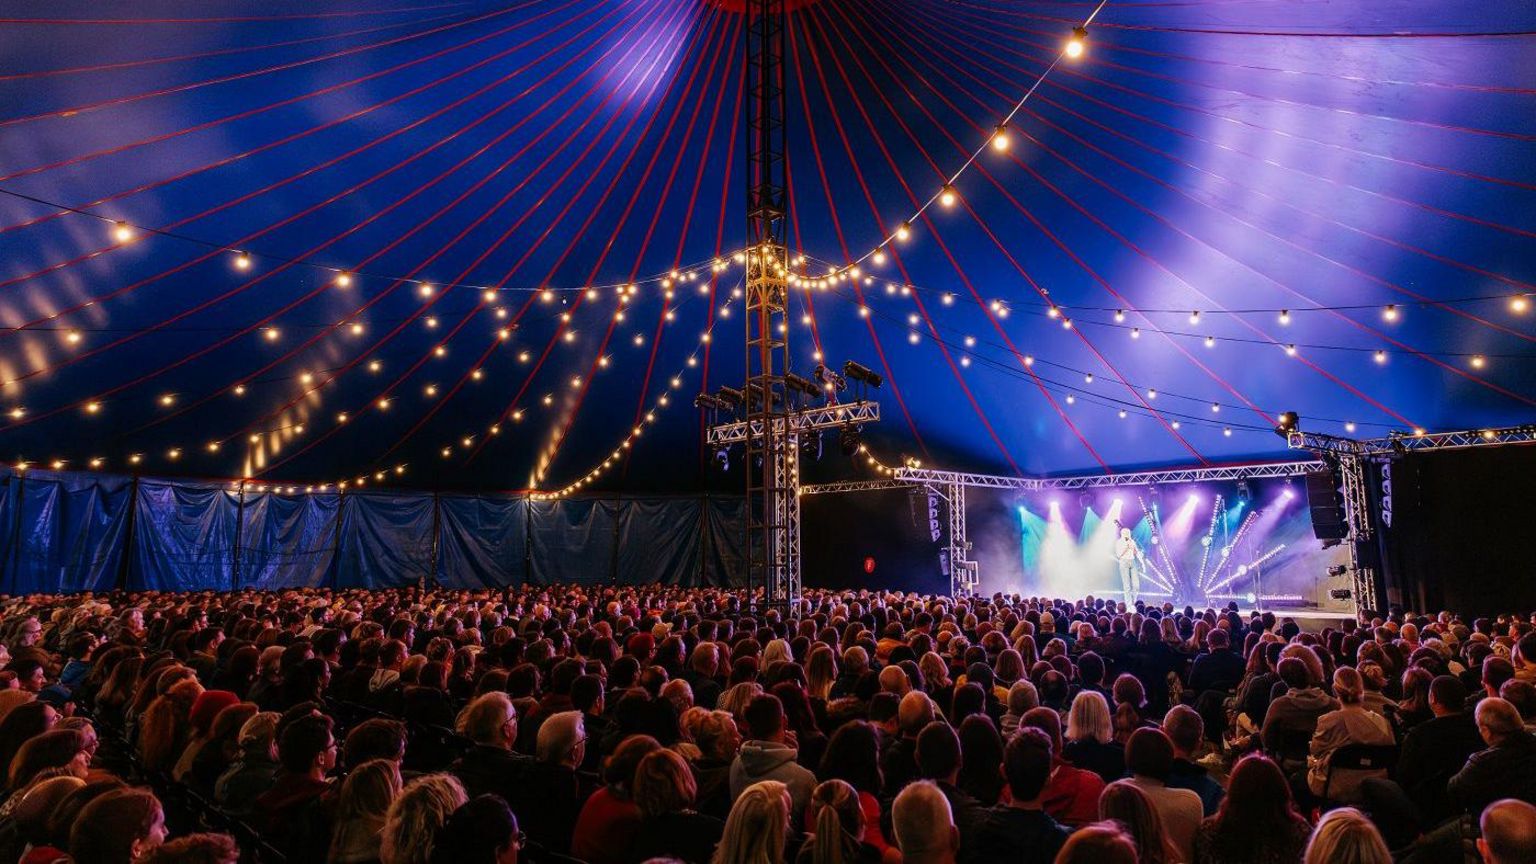 Hundreds of people sitting inside the tent at Bristol Comedy Garden